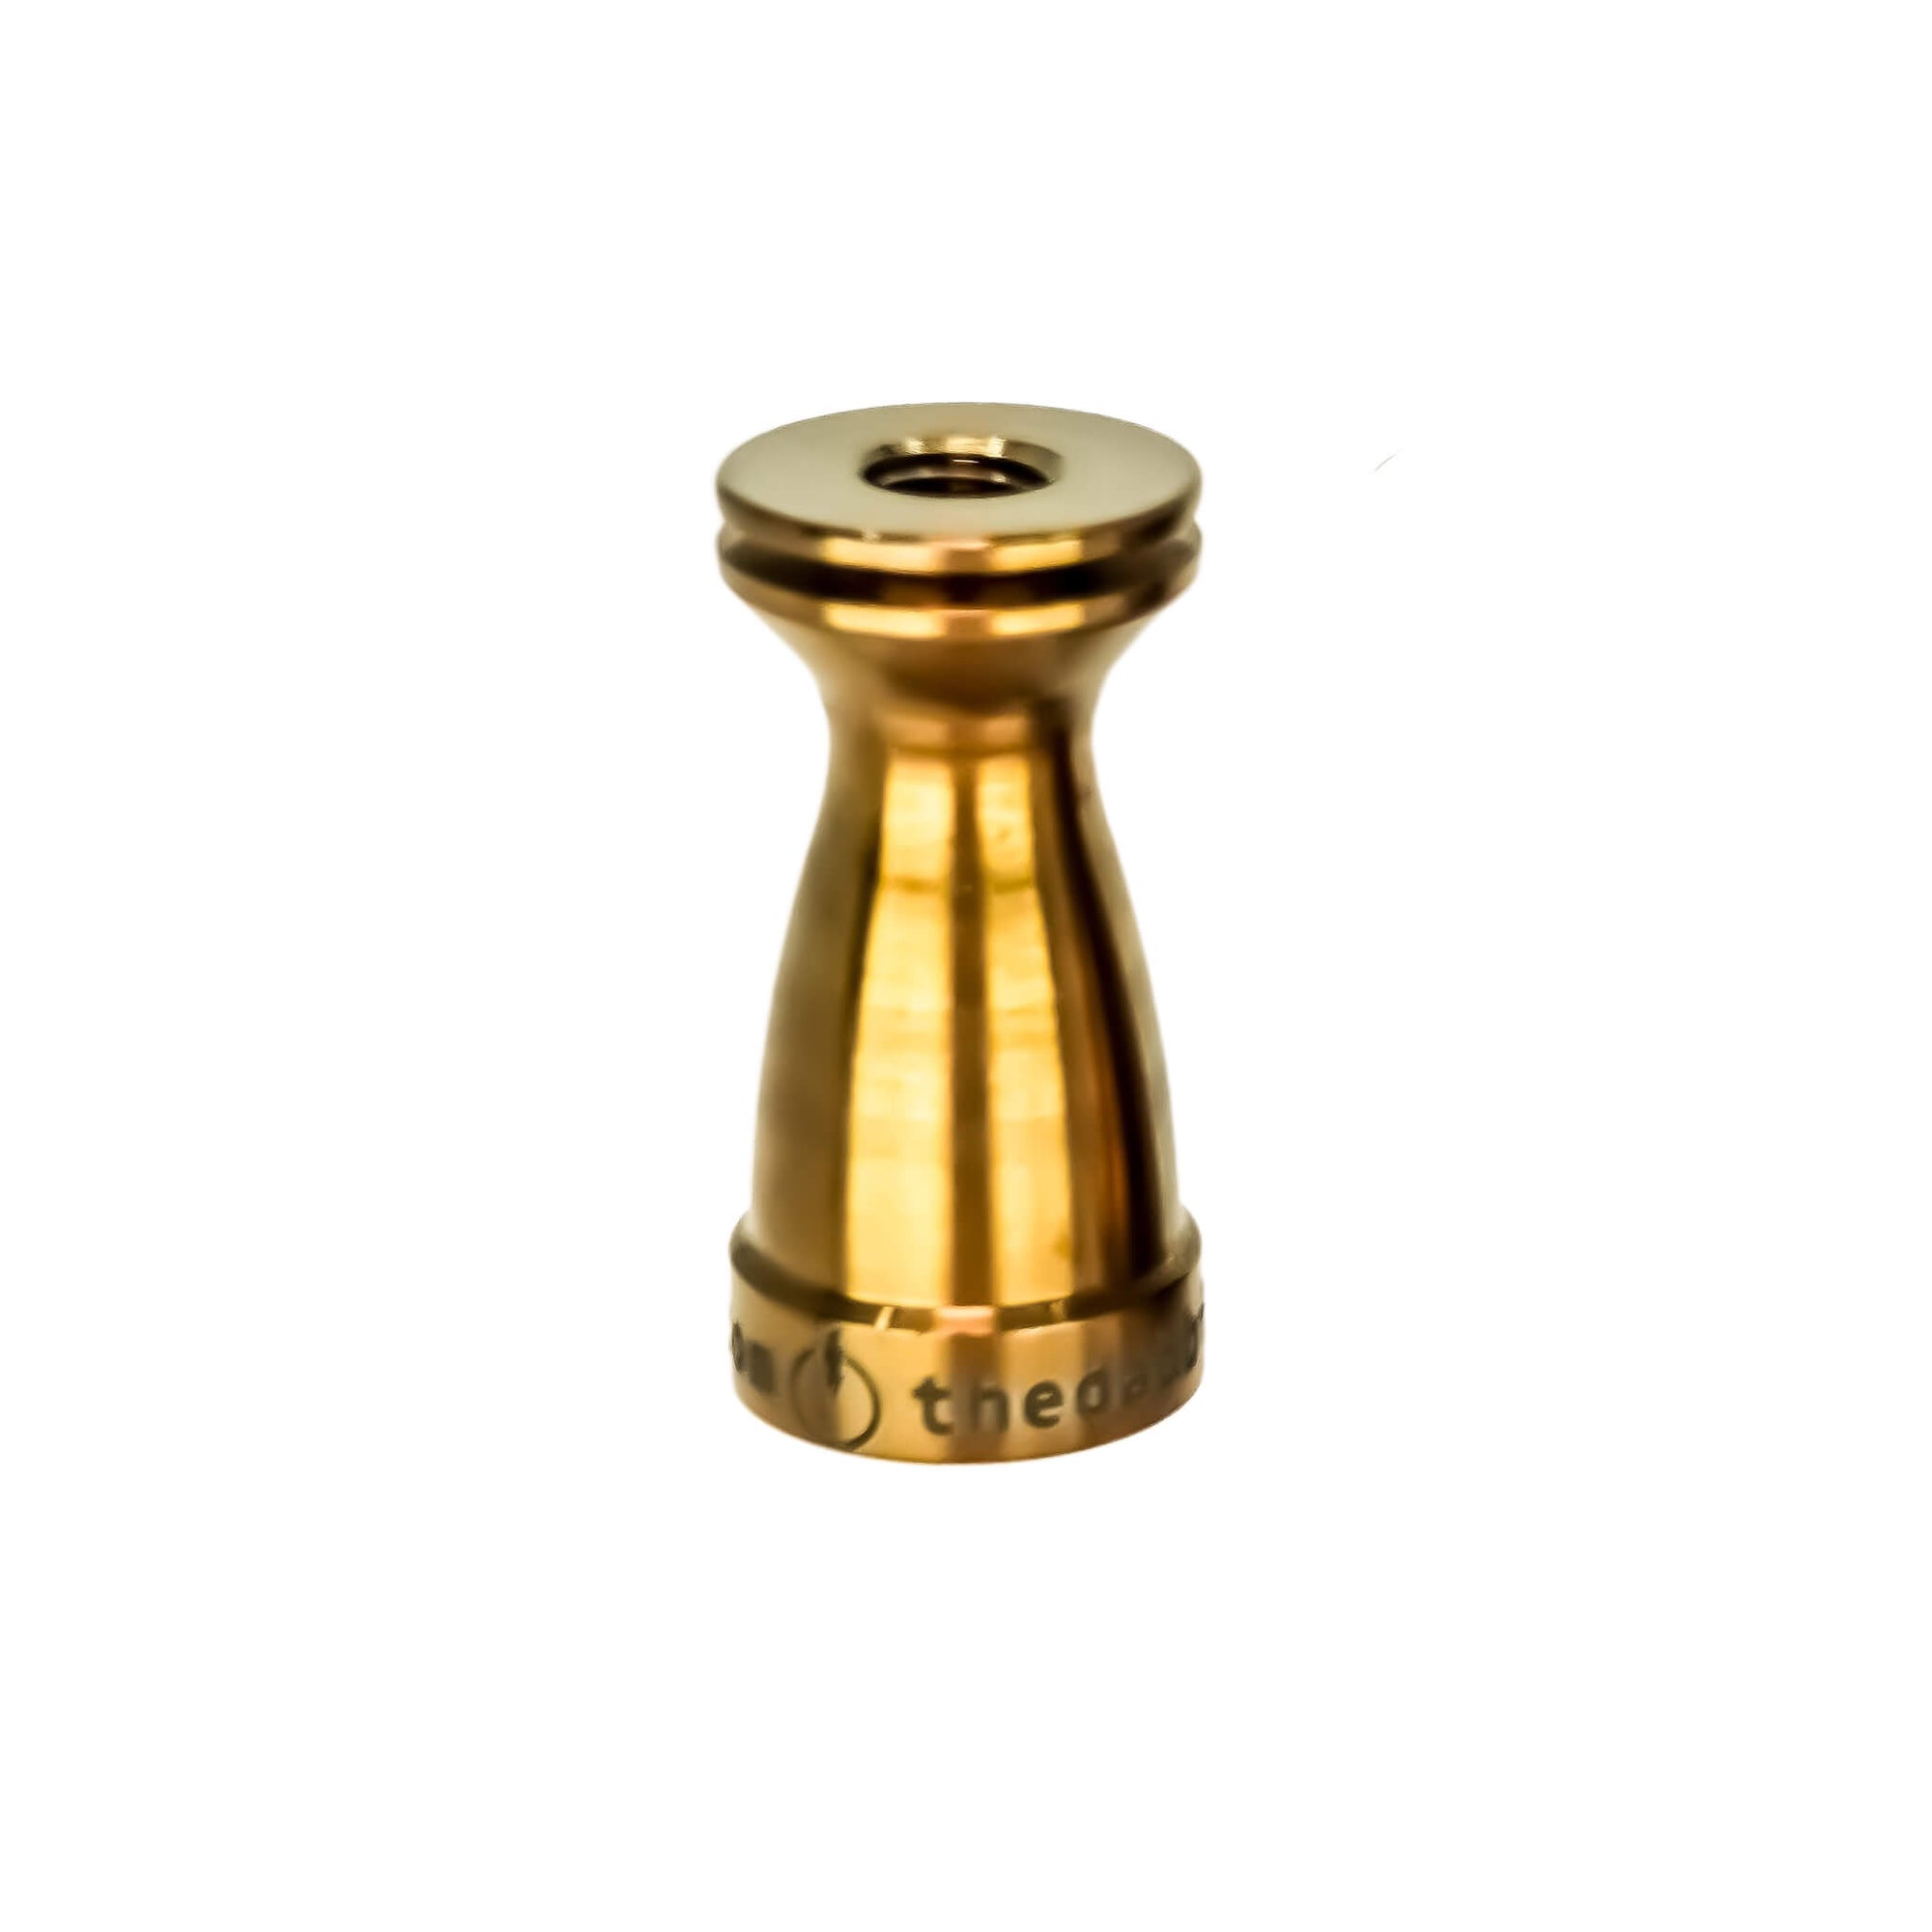 Titanium Female Nail Body 14mm, 10mm | Anodized Amber Profile View | the dabbing specialists